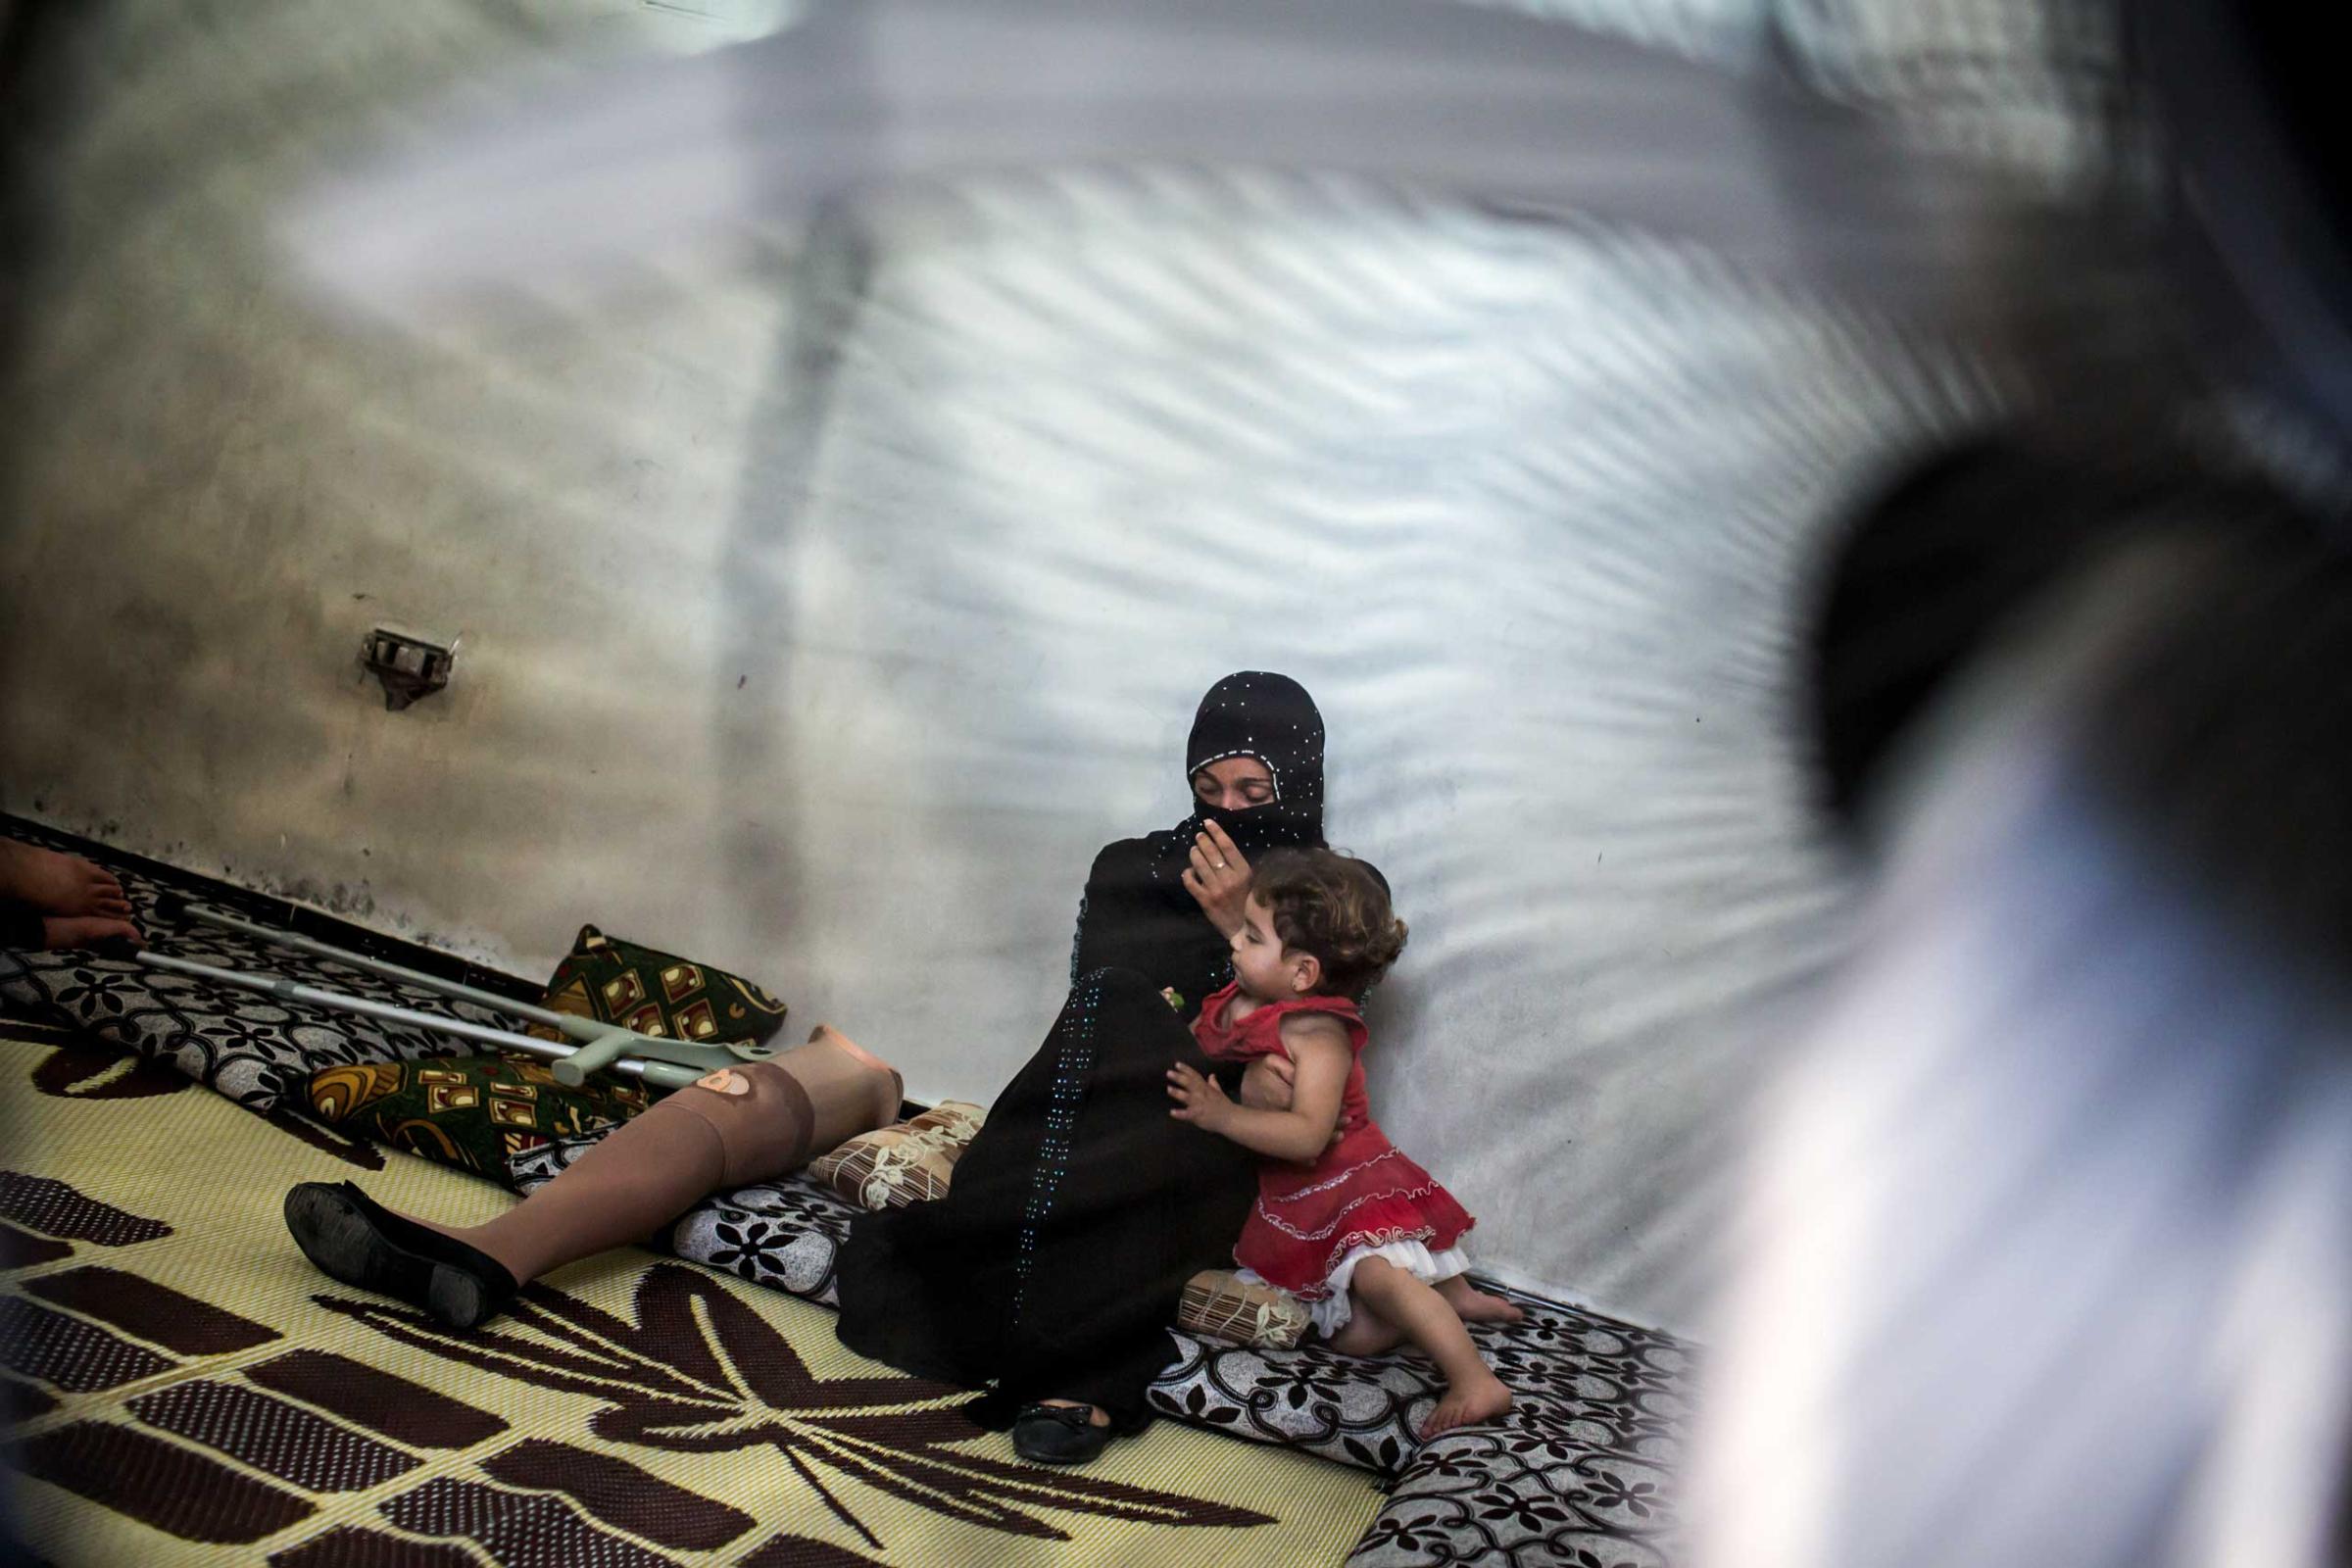 Awatef, 25, with her daughter, Sabah, 2, at home in Tripoli, Lebanon, June 24, 2014. She lost her leg in shelling near her home in Homs earlier this year. She walked for the first time in six months: “I keep practicing so it is getting easier.”